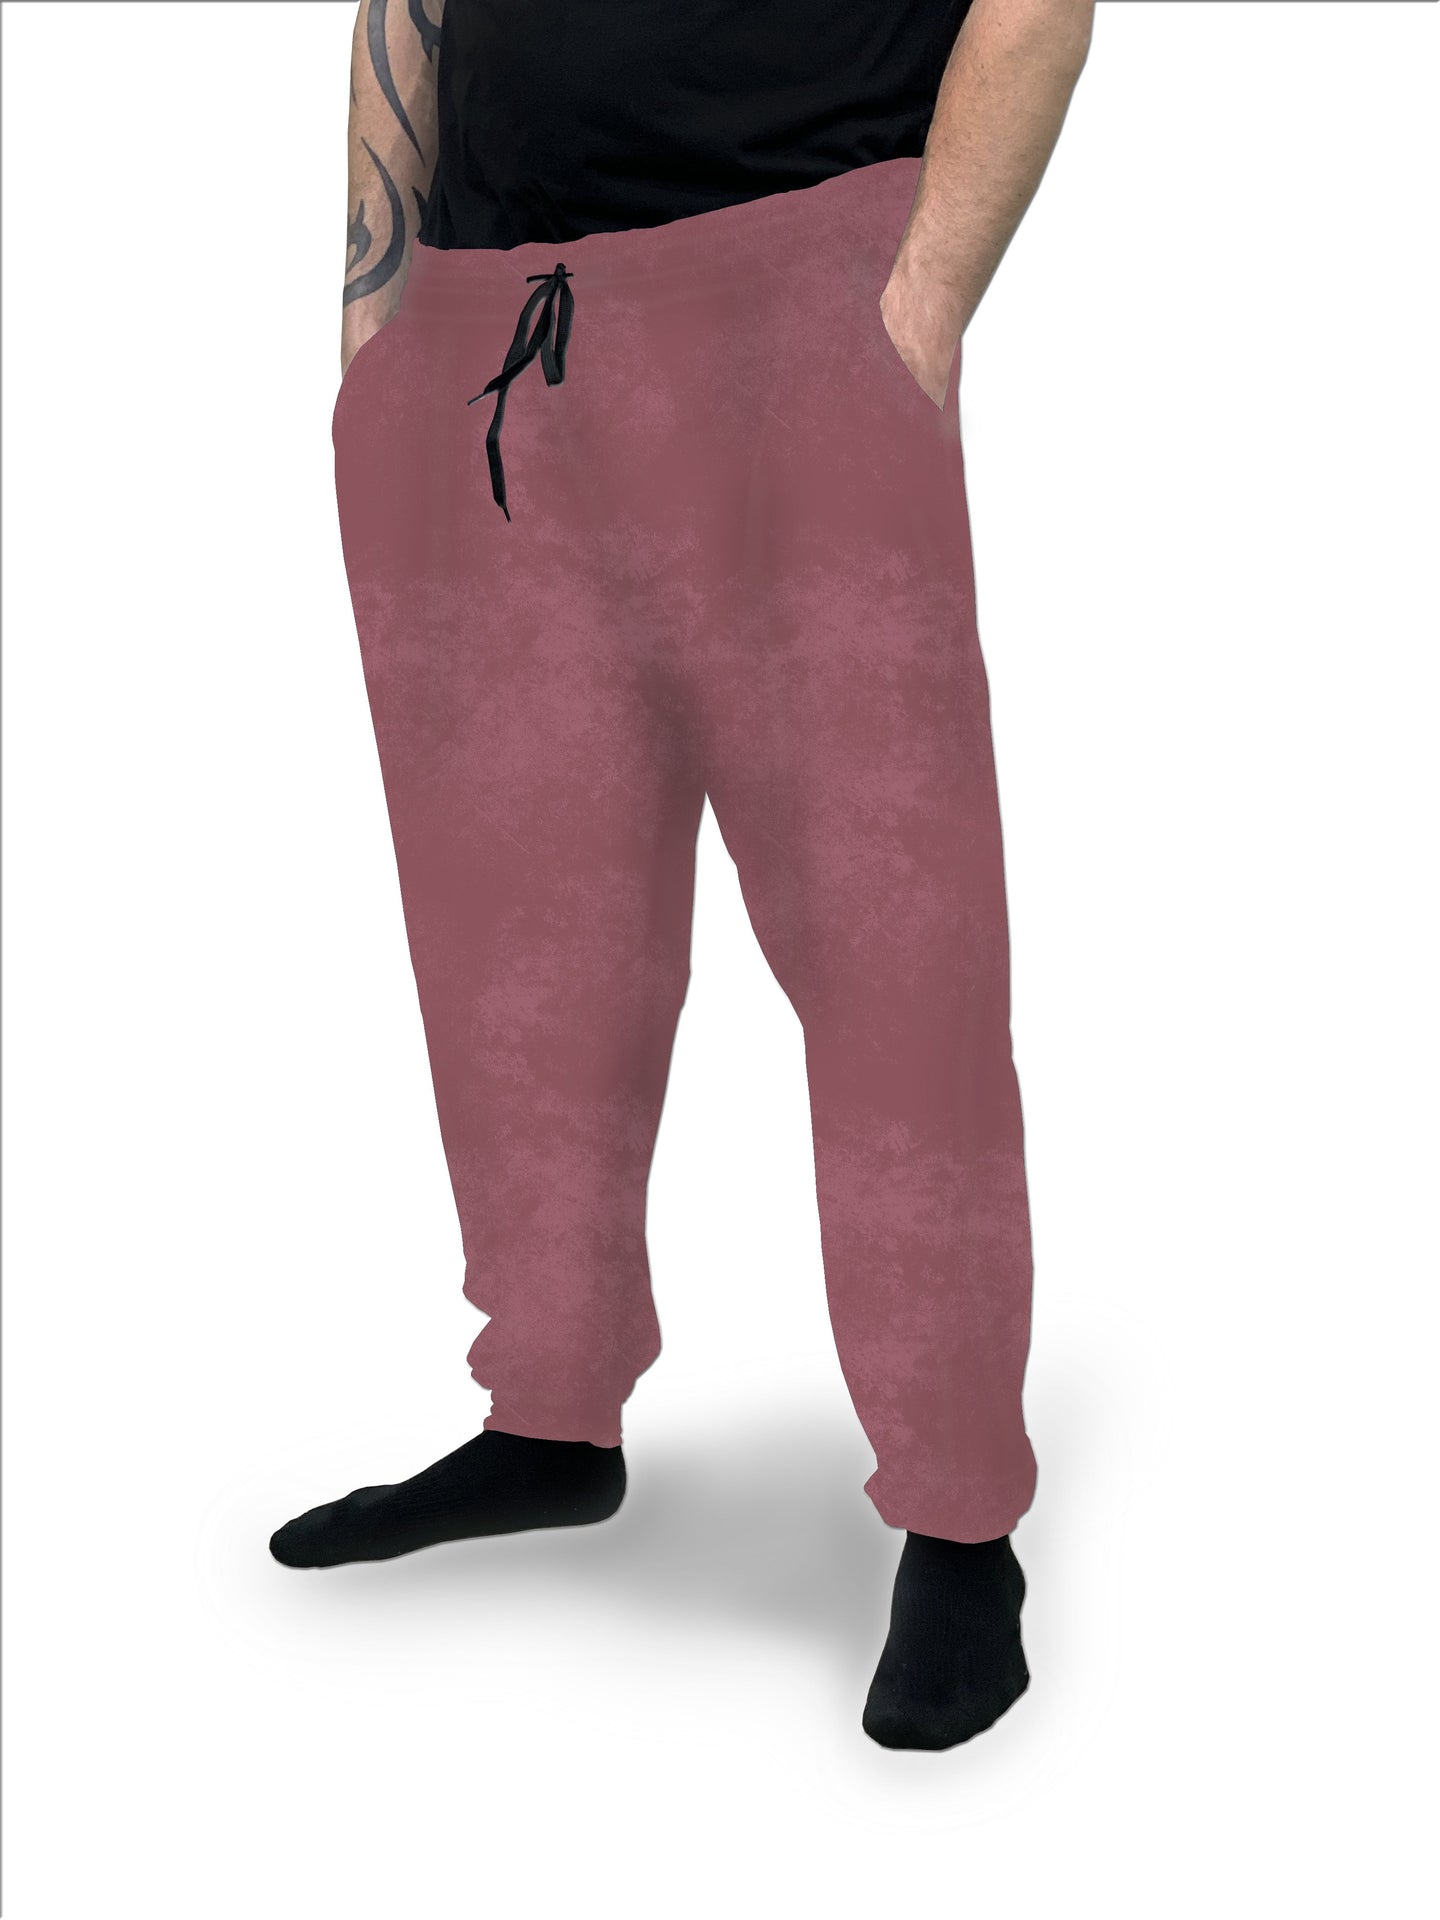 COLOR COLLECTION - DUSTY ROSE FULL & CAPRI LENGTH JOGGERS